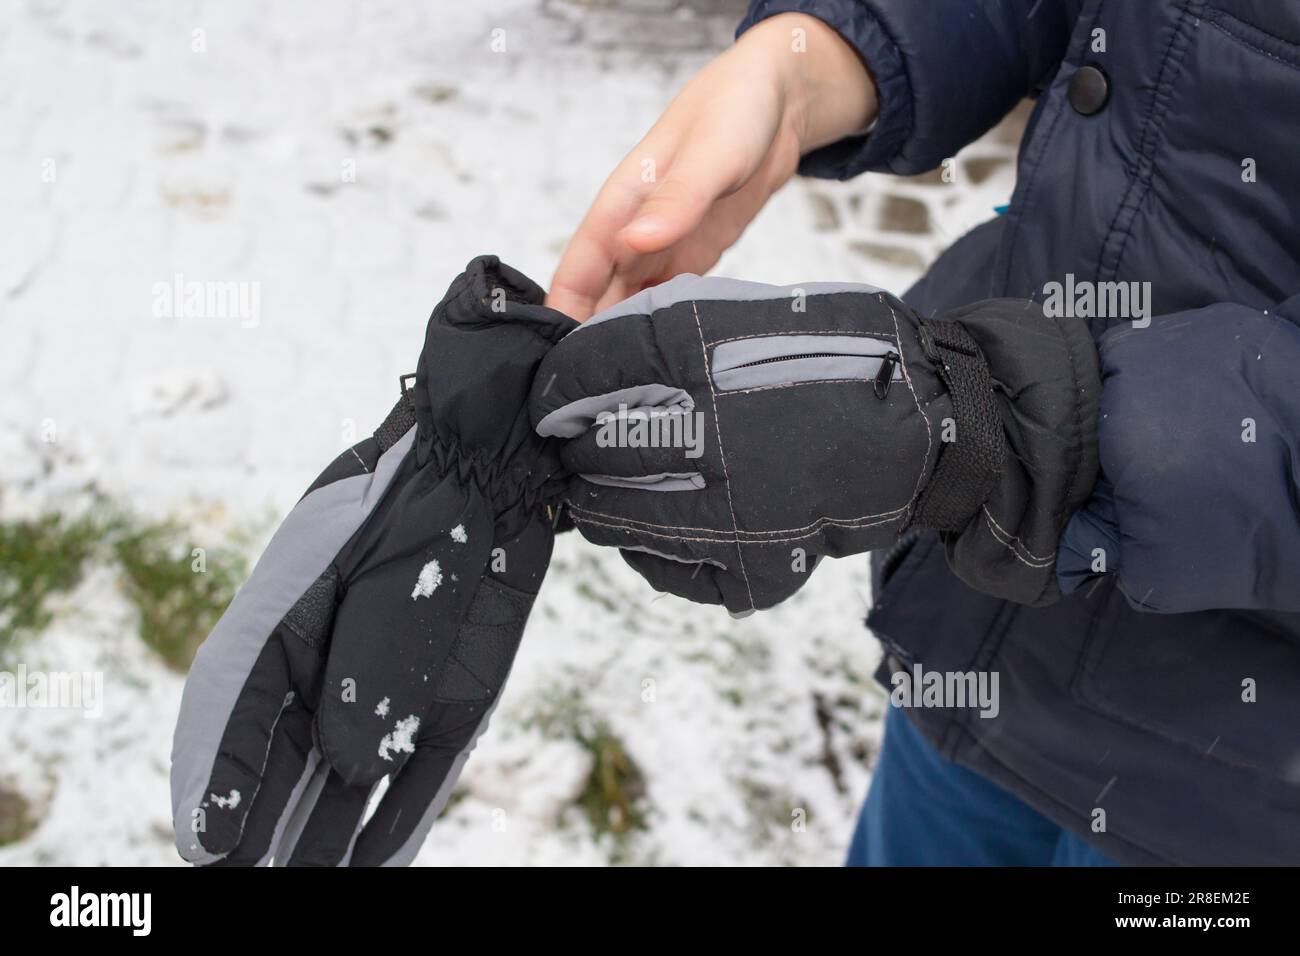 a young boy put on gloves in his hands in the winter Stock Photo